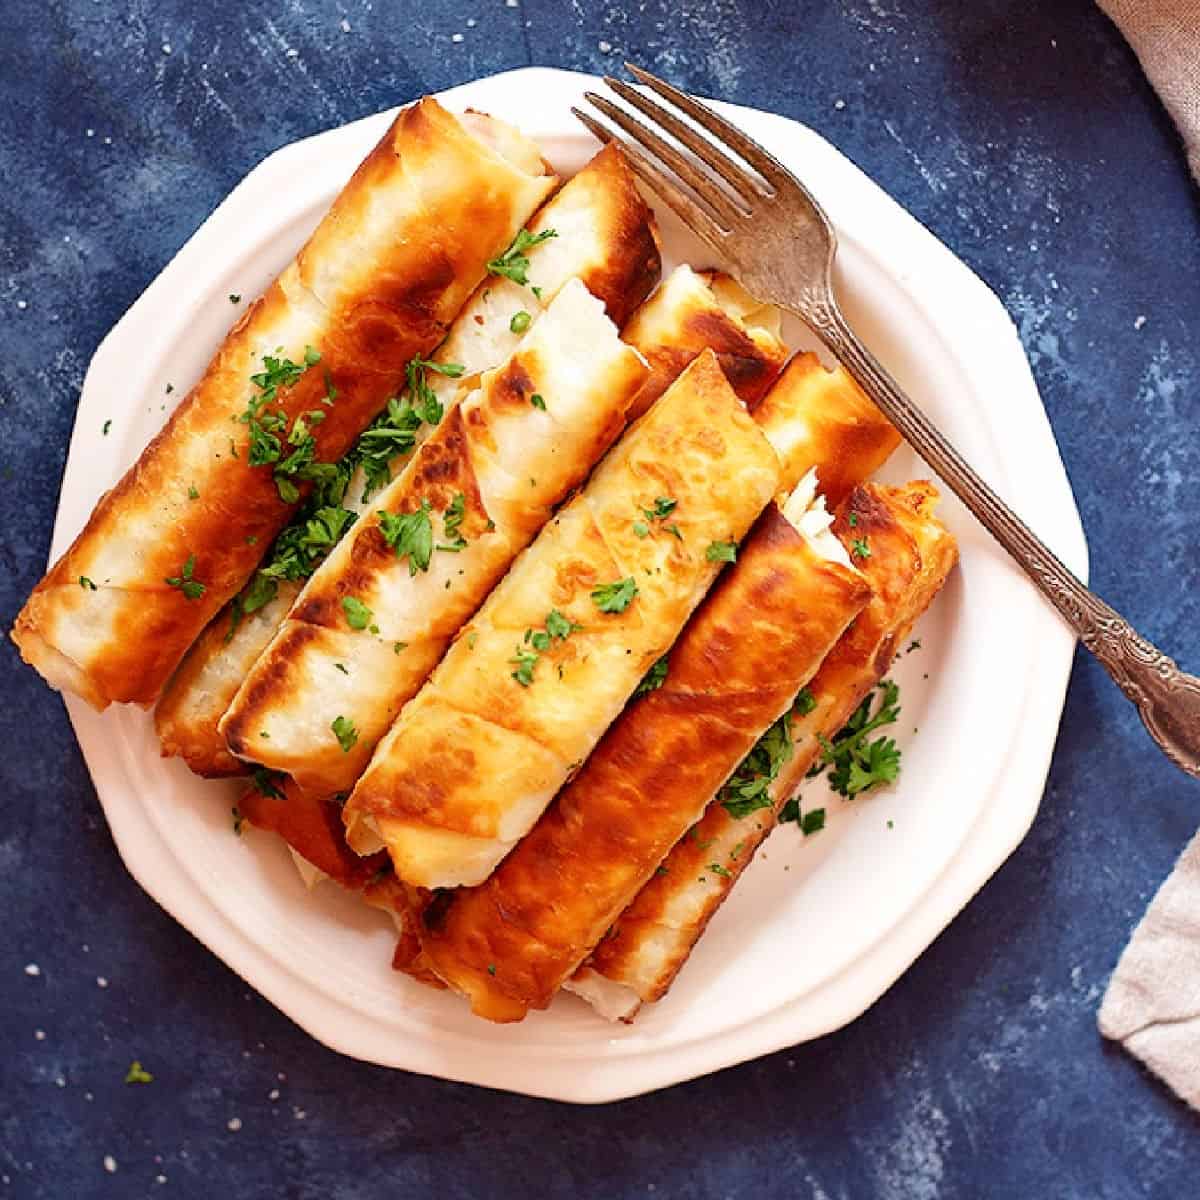 Borek is a Turkish savory crunchy pastry filled with different fillings such as cheese or potatoes. Learn how to make Turkish borek recipe by watching our step-by-step video and tutorial. They are perfect as a midday snack or for breakfast and you can make them in advance and freeze them for later. 
